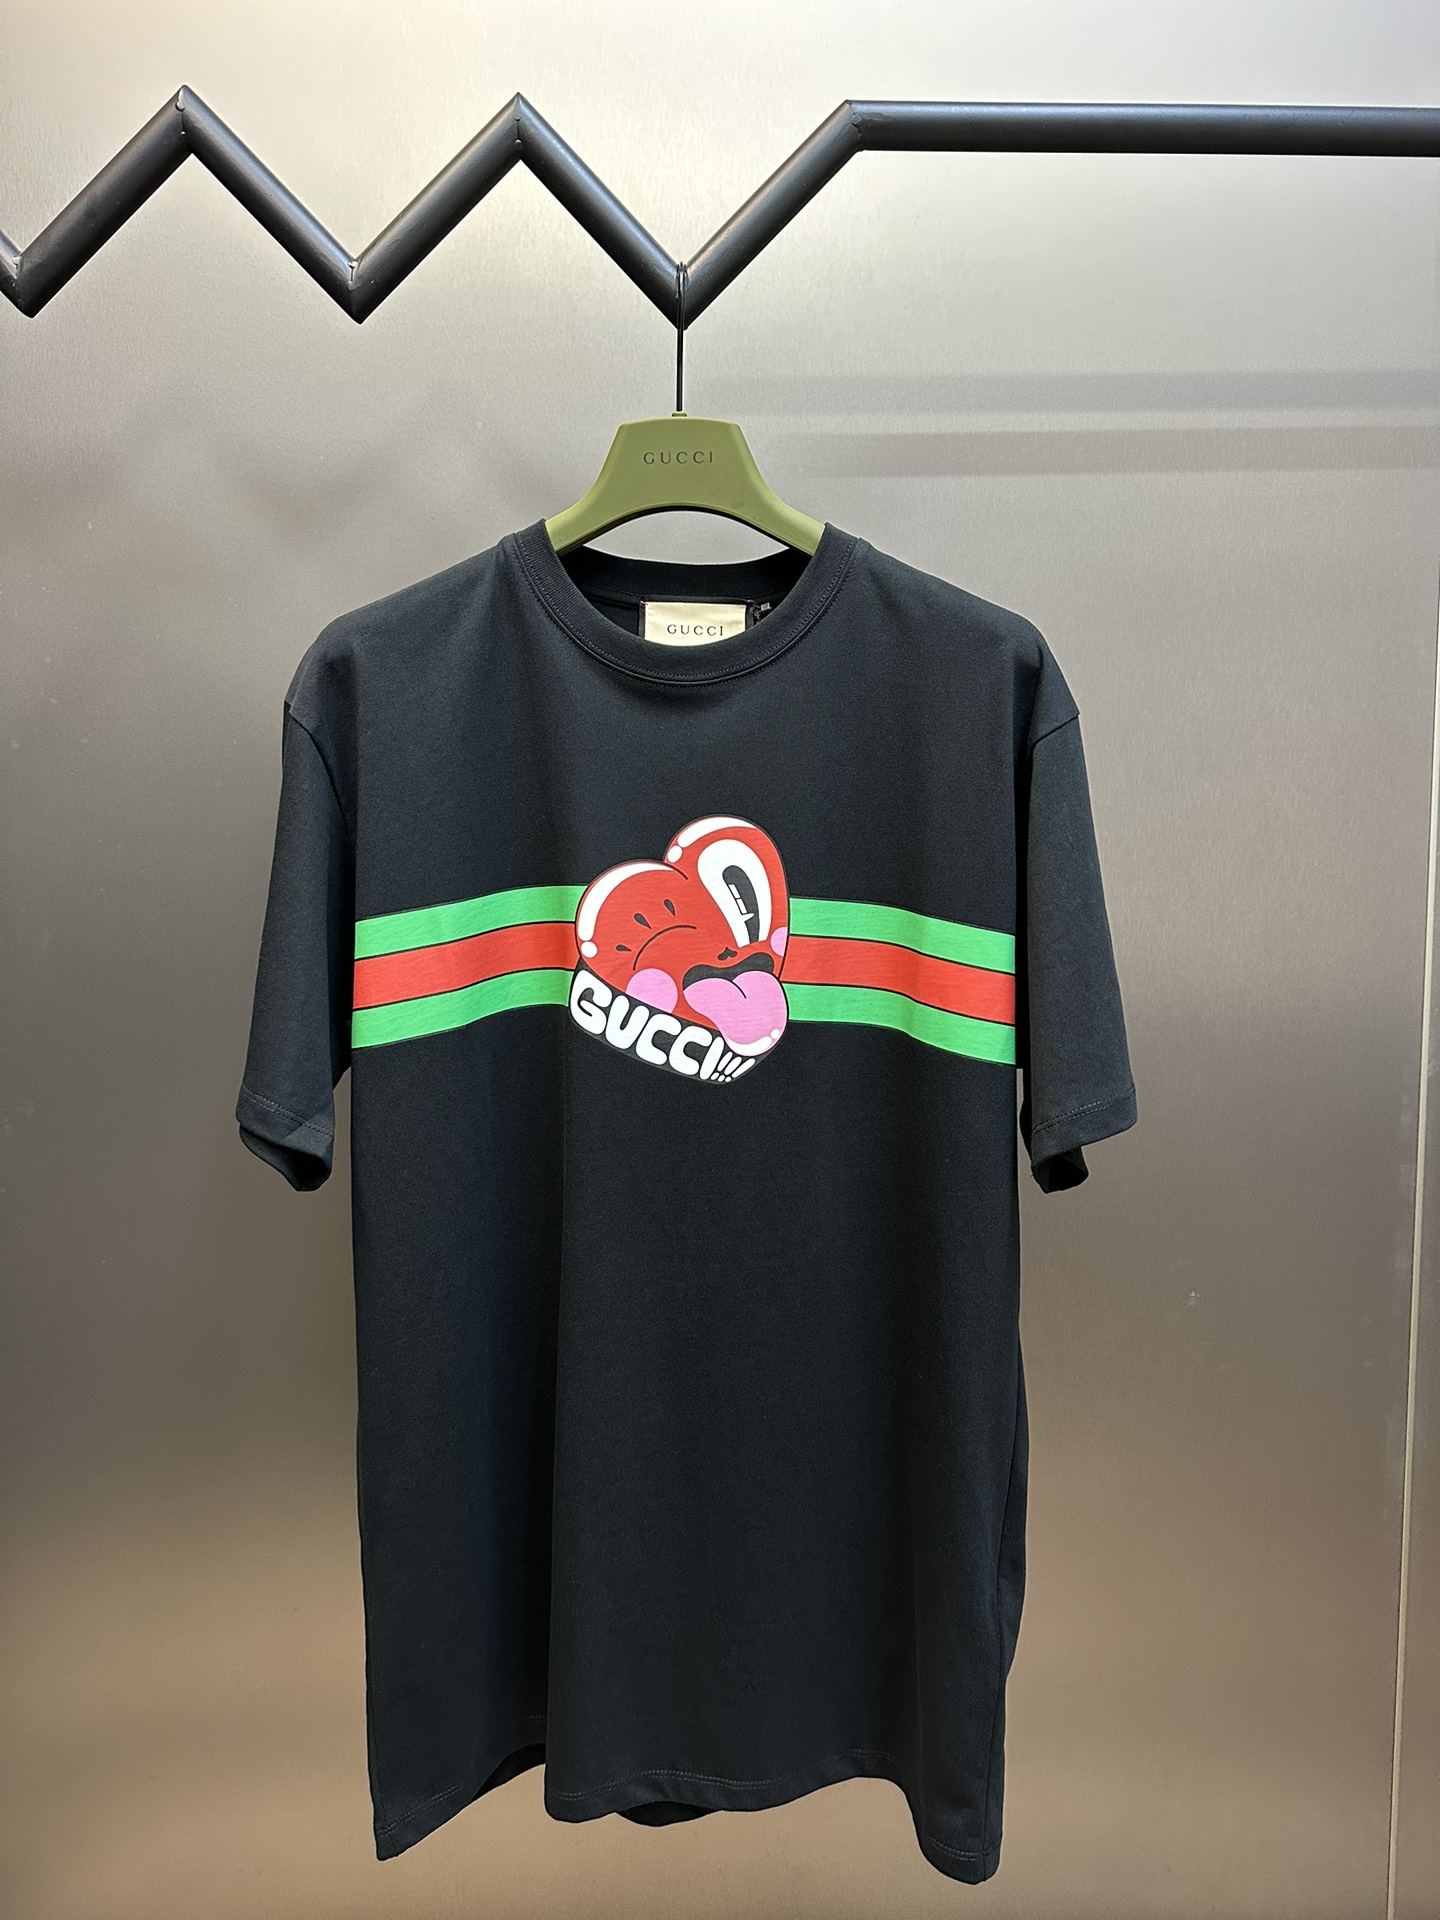 Gucci Clothing T-Shirt Printing Cotton Fabric Knitted Knitting Fall Collection Short Sleeve